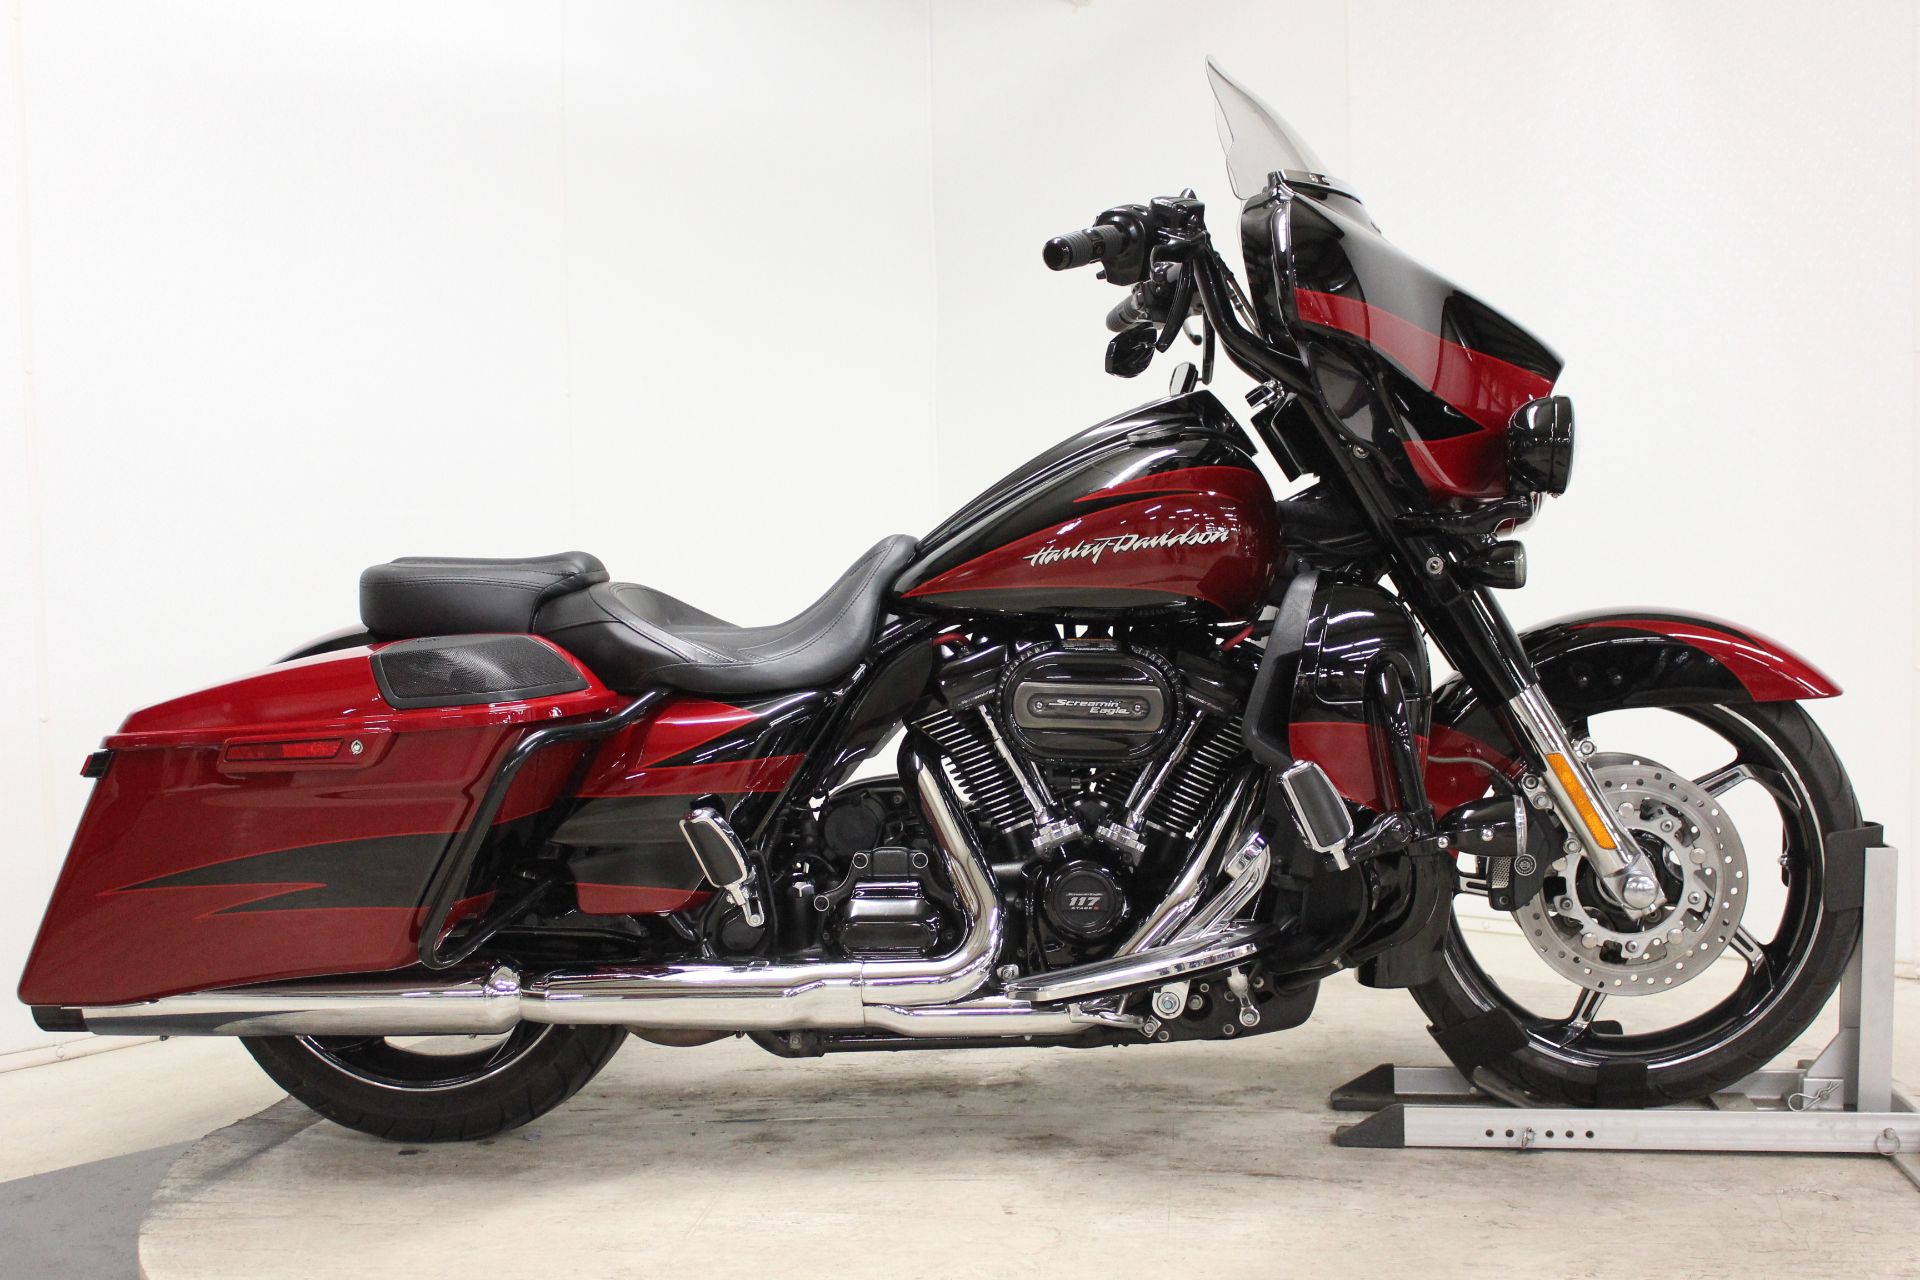 Used 2017 Harley Davidson Cvo Street Glide Starfire Black Atomic Red Motorcycles In Pittsfield Ma 951768